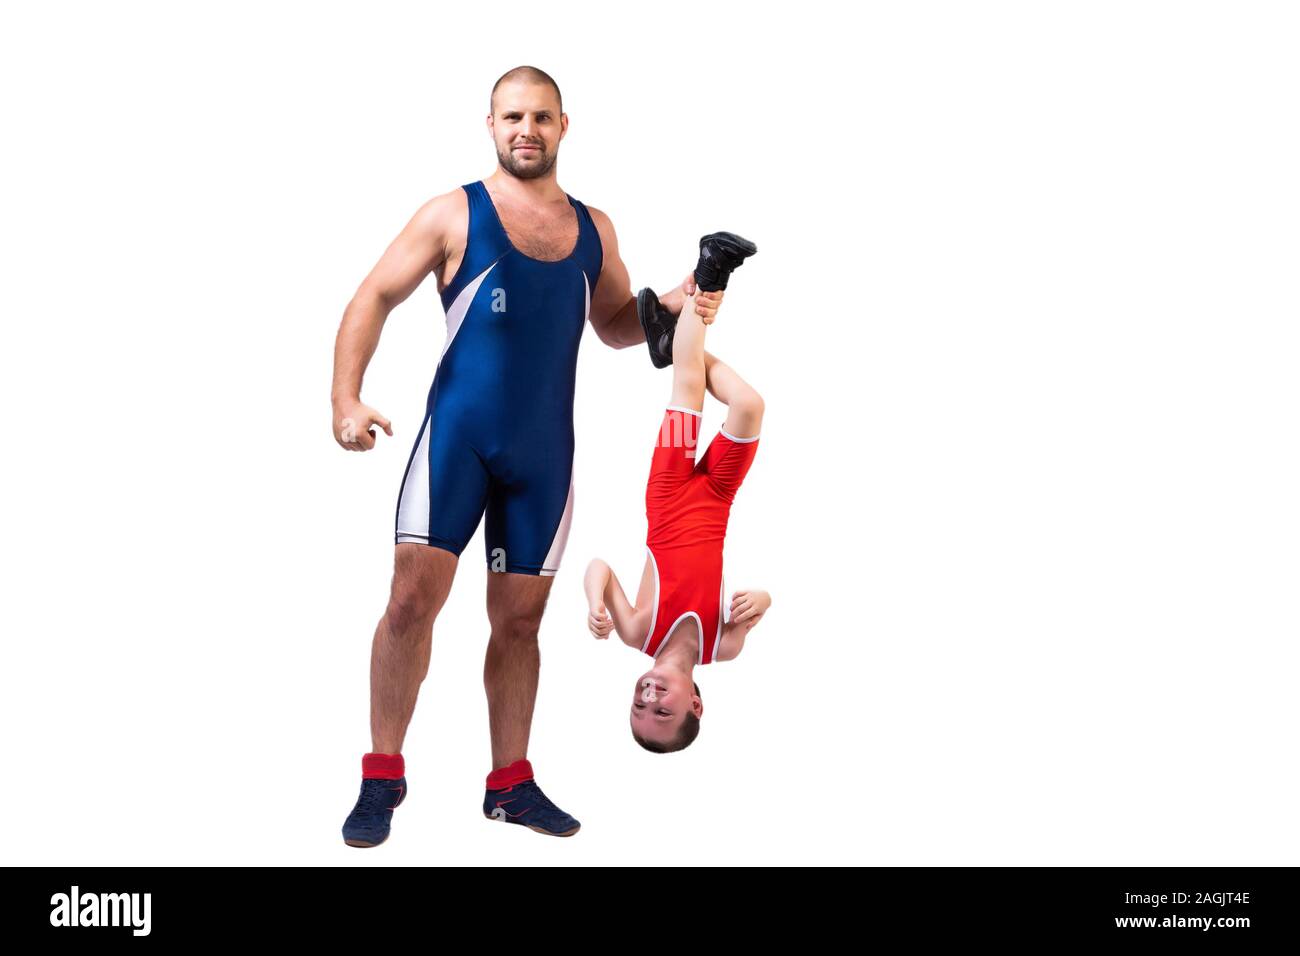 Men In Wrestling Tights And Wrestlers Holds The Foot Of A Wrestler Boy On A White Isolated